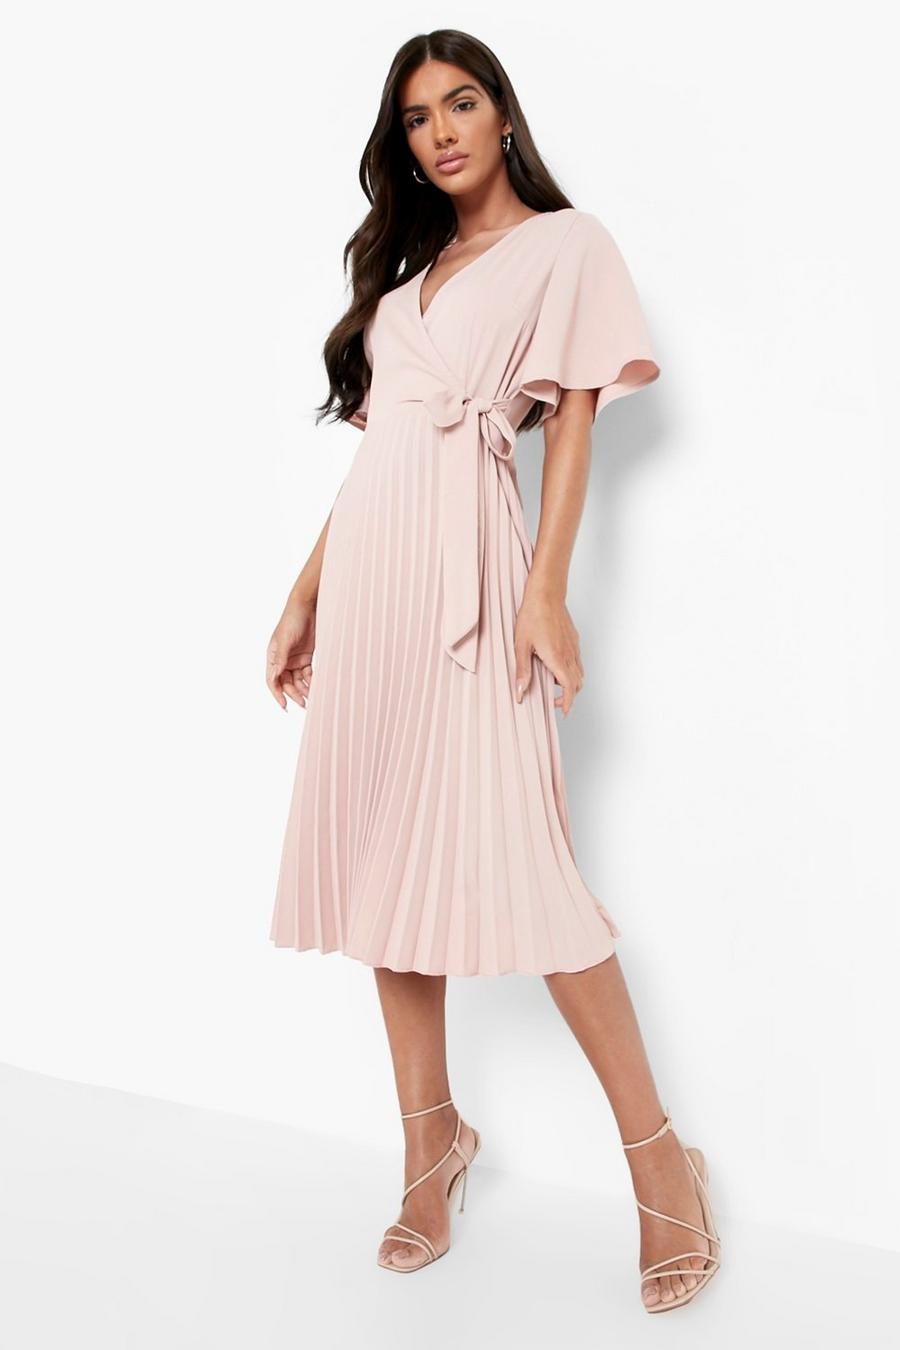 Dusty rose pink Woven Pleated Midi Skater Dress